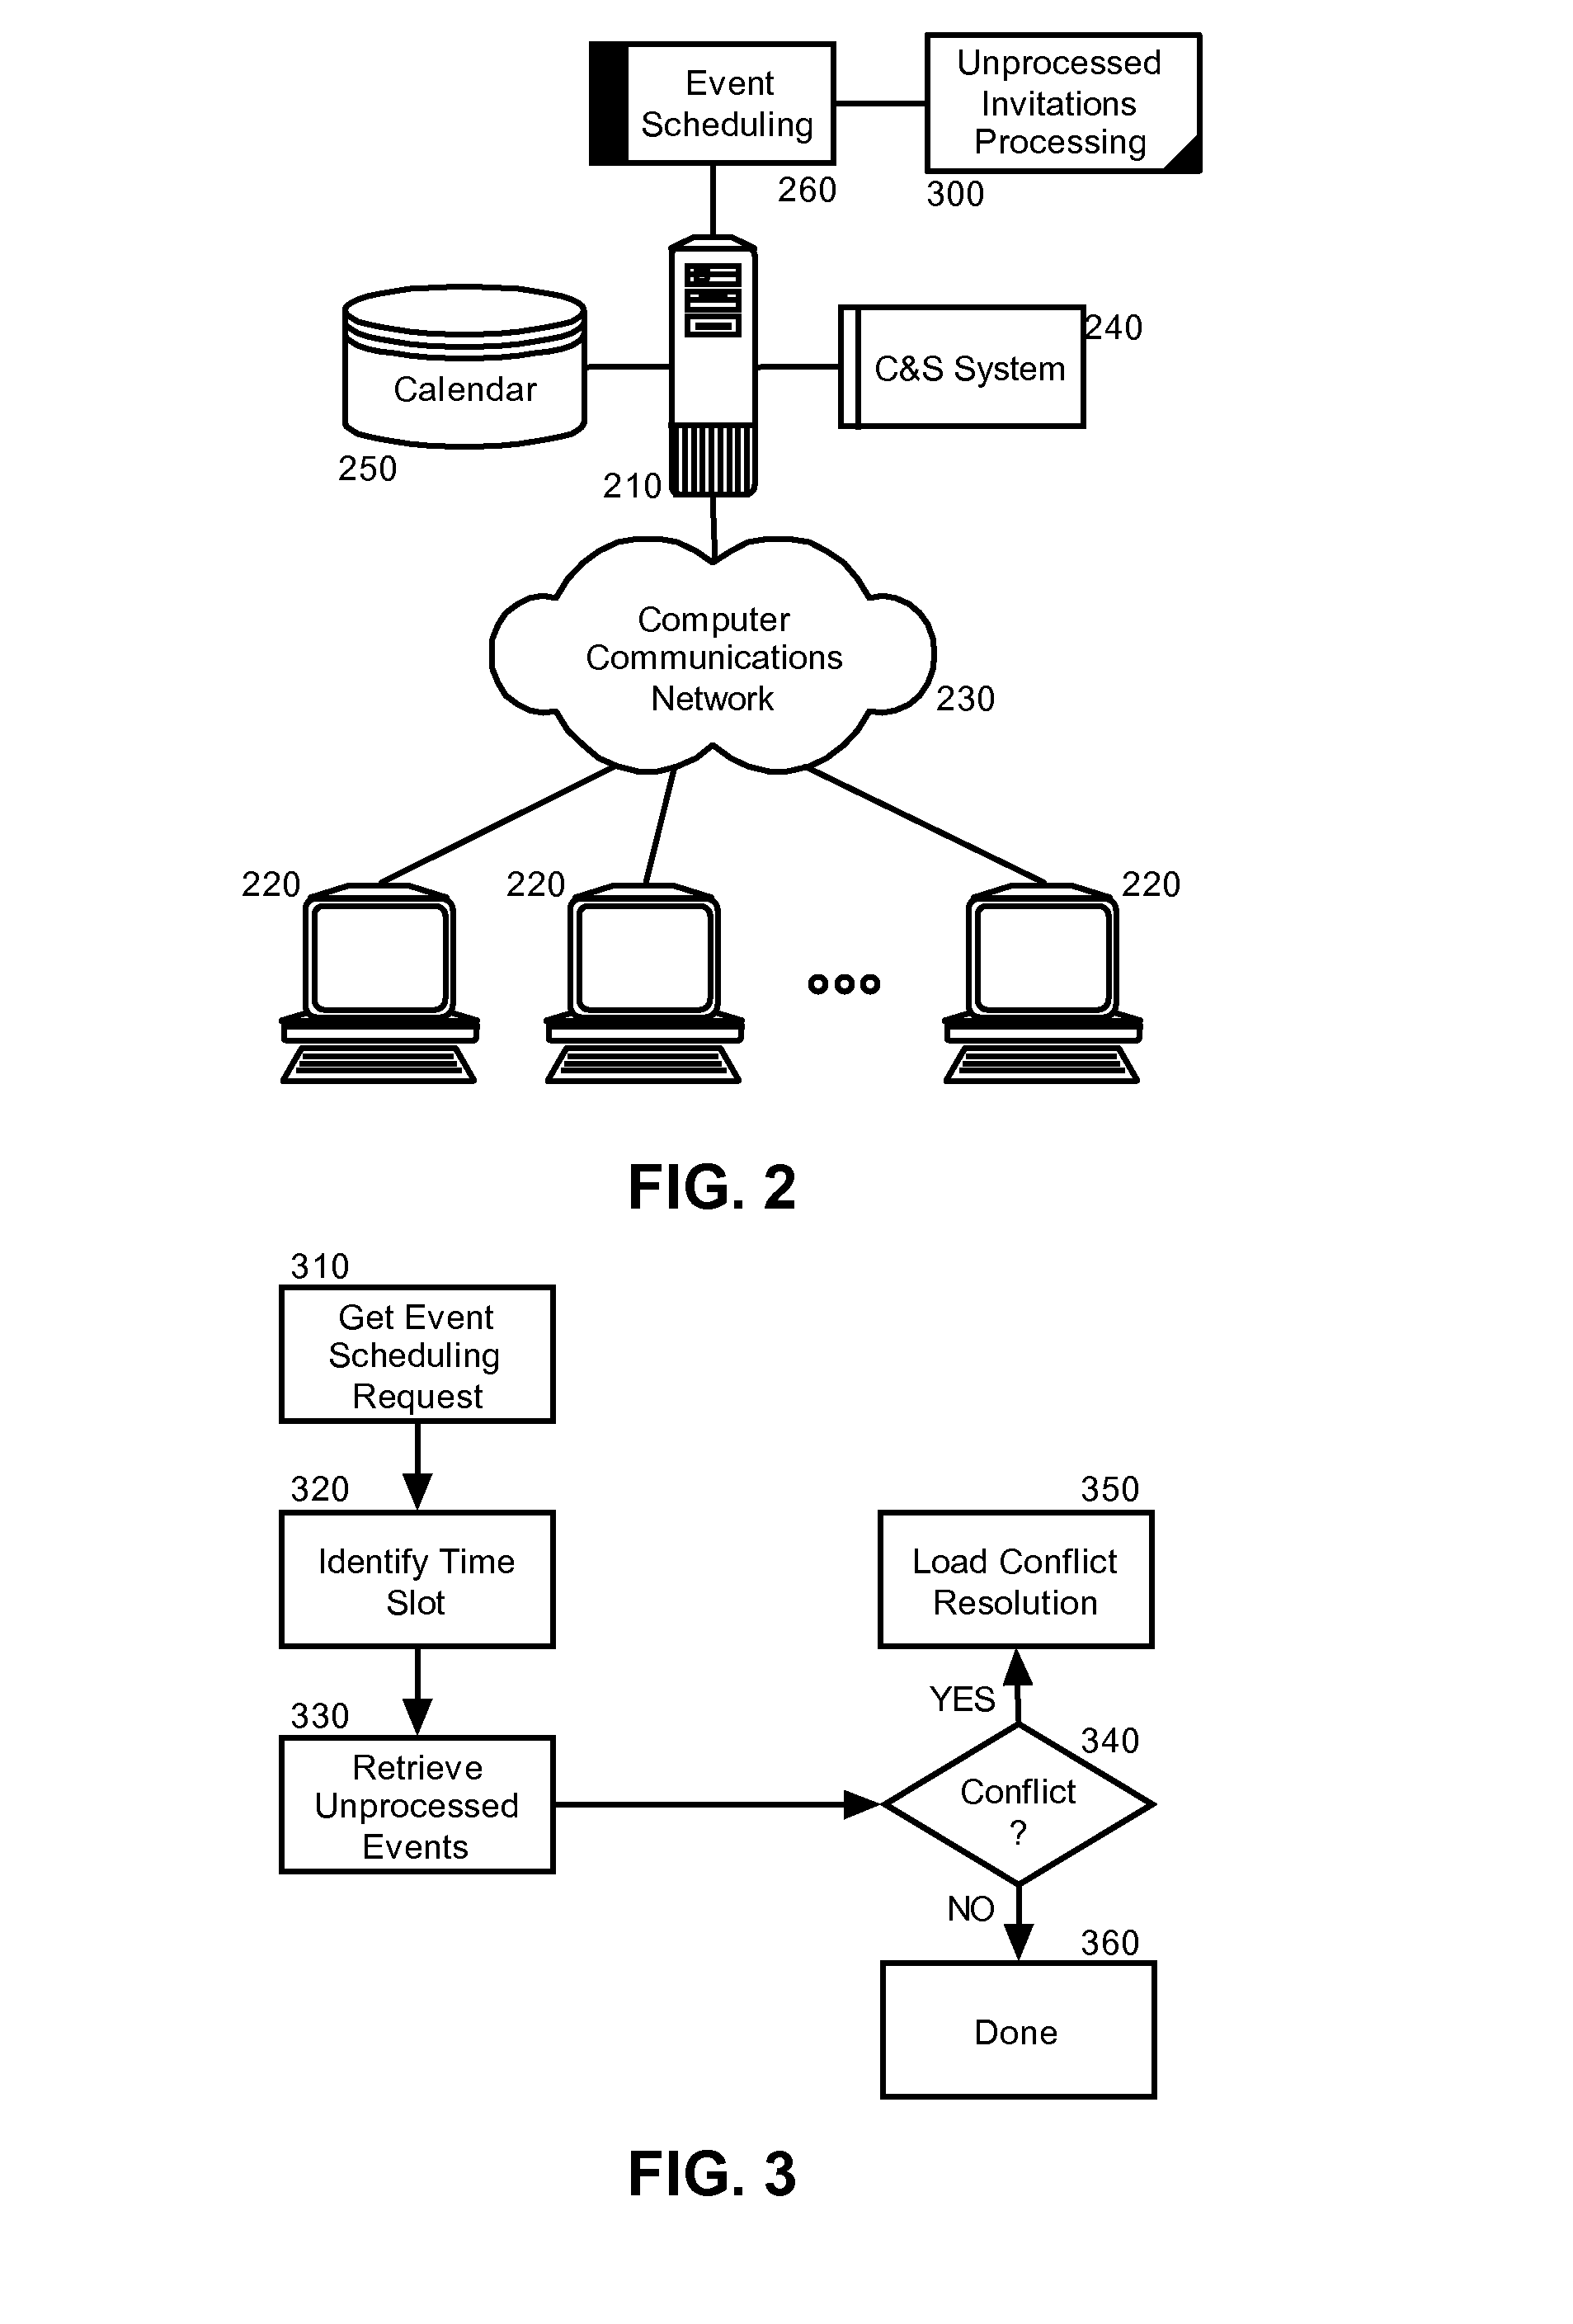 Event scheduling conflict management and resolution for unprocessed events in a collaborative computing environment